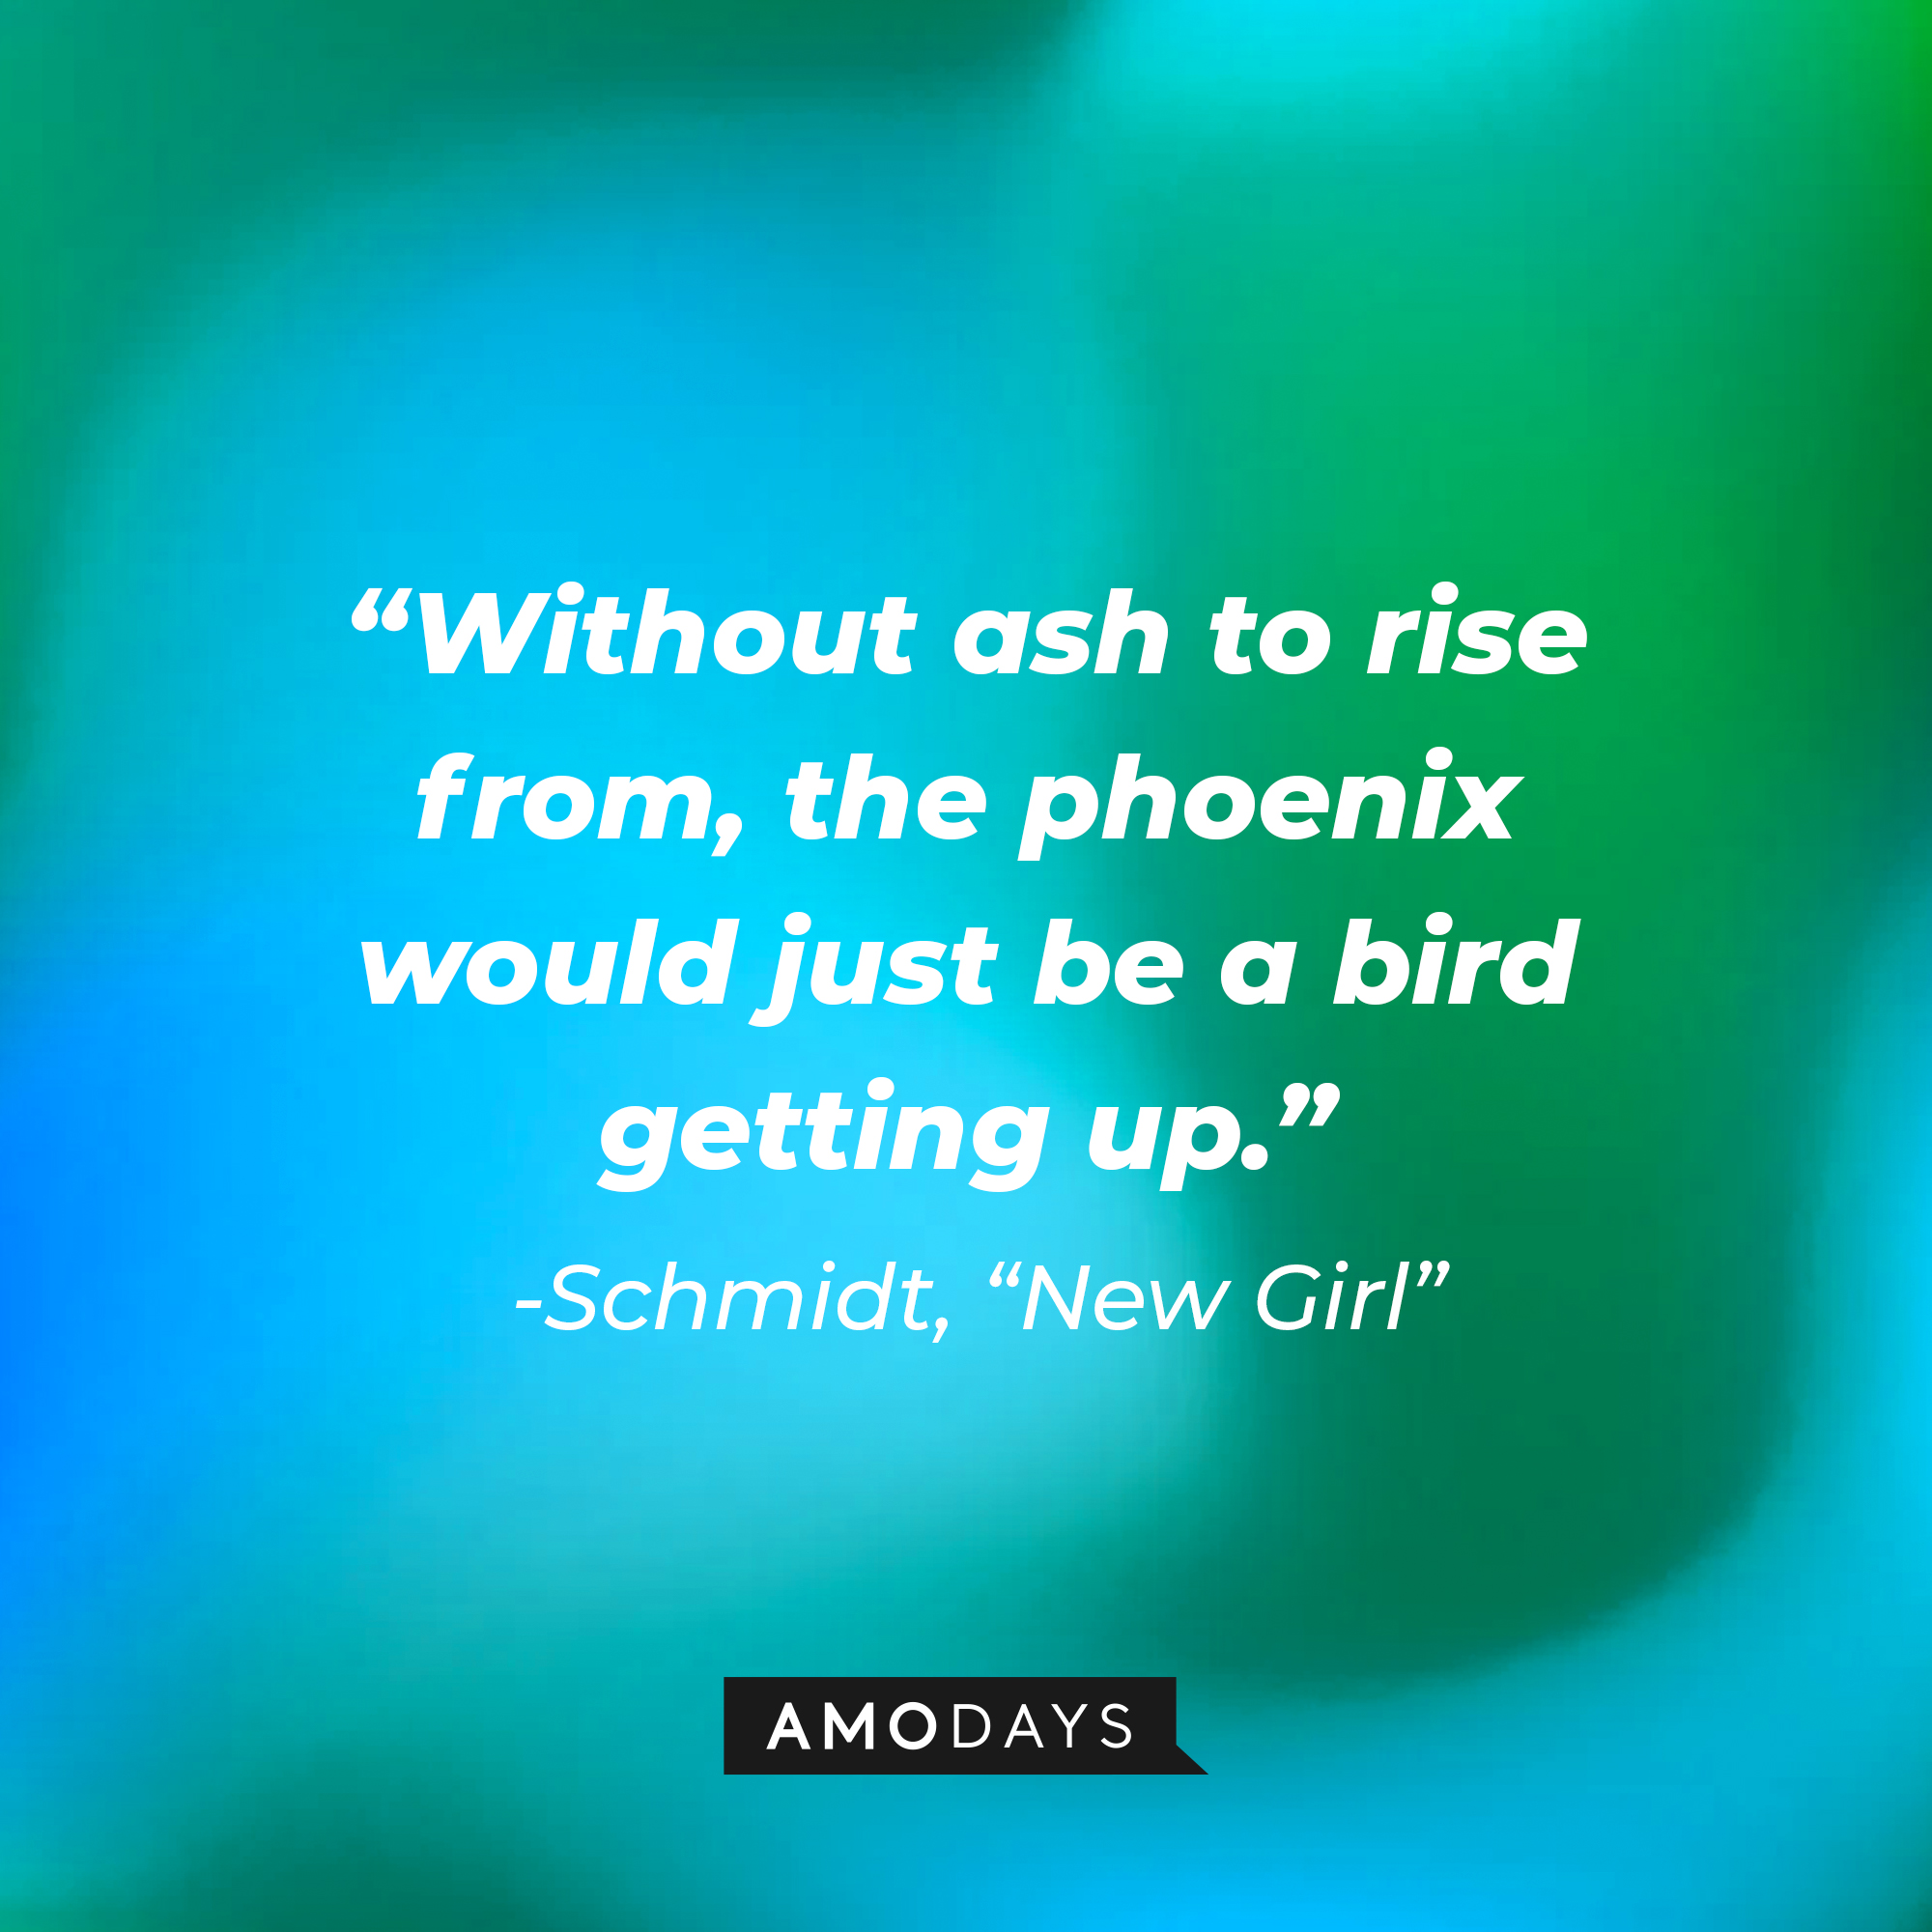 Schmidt's quote: "Without ash to rise from, the phoenix would just be a bird getting up." | Source: Amodays